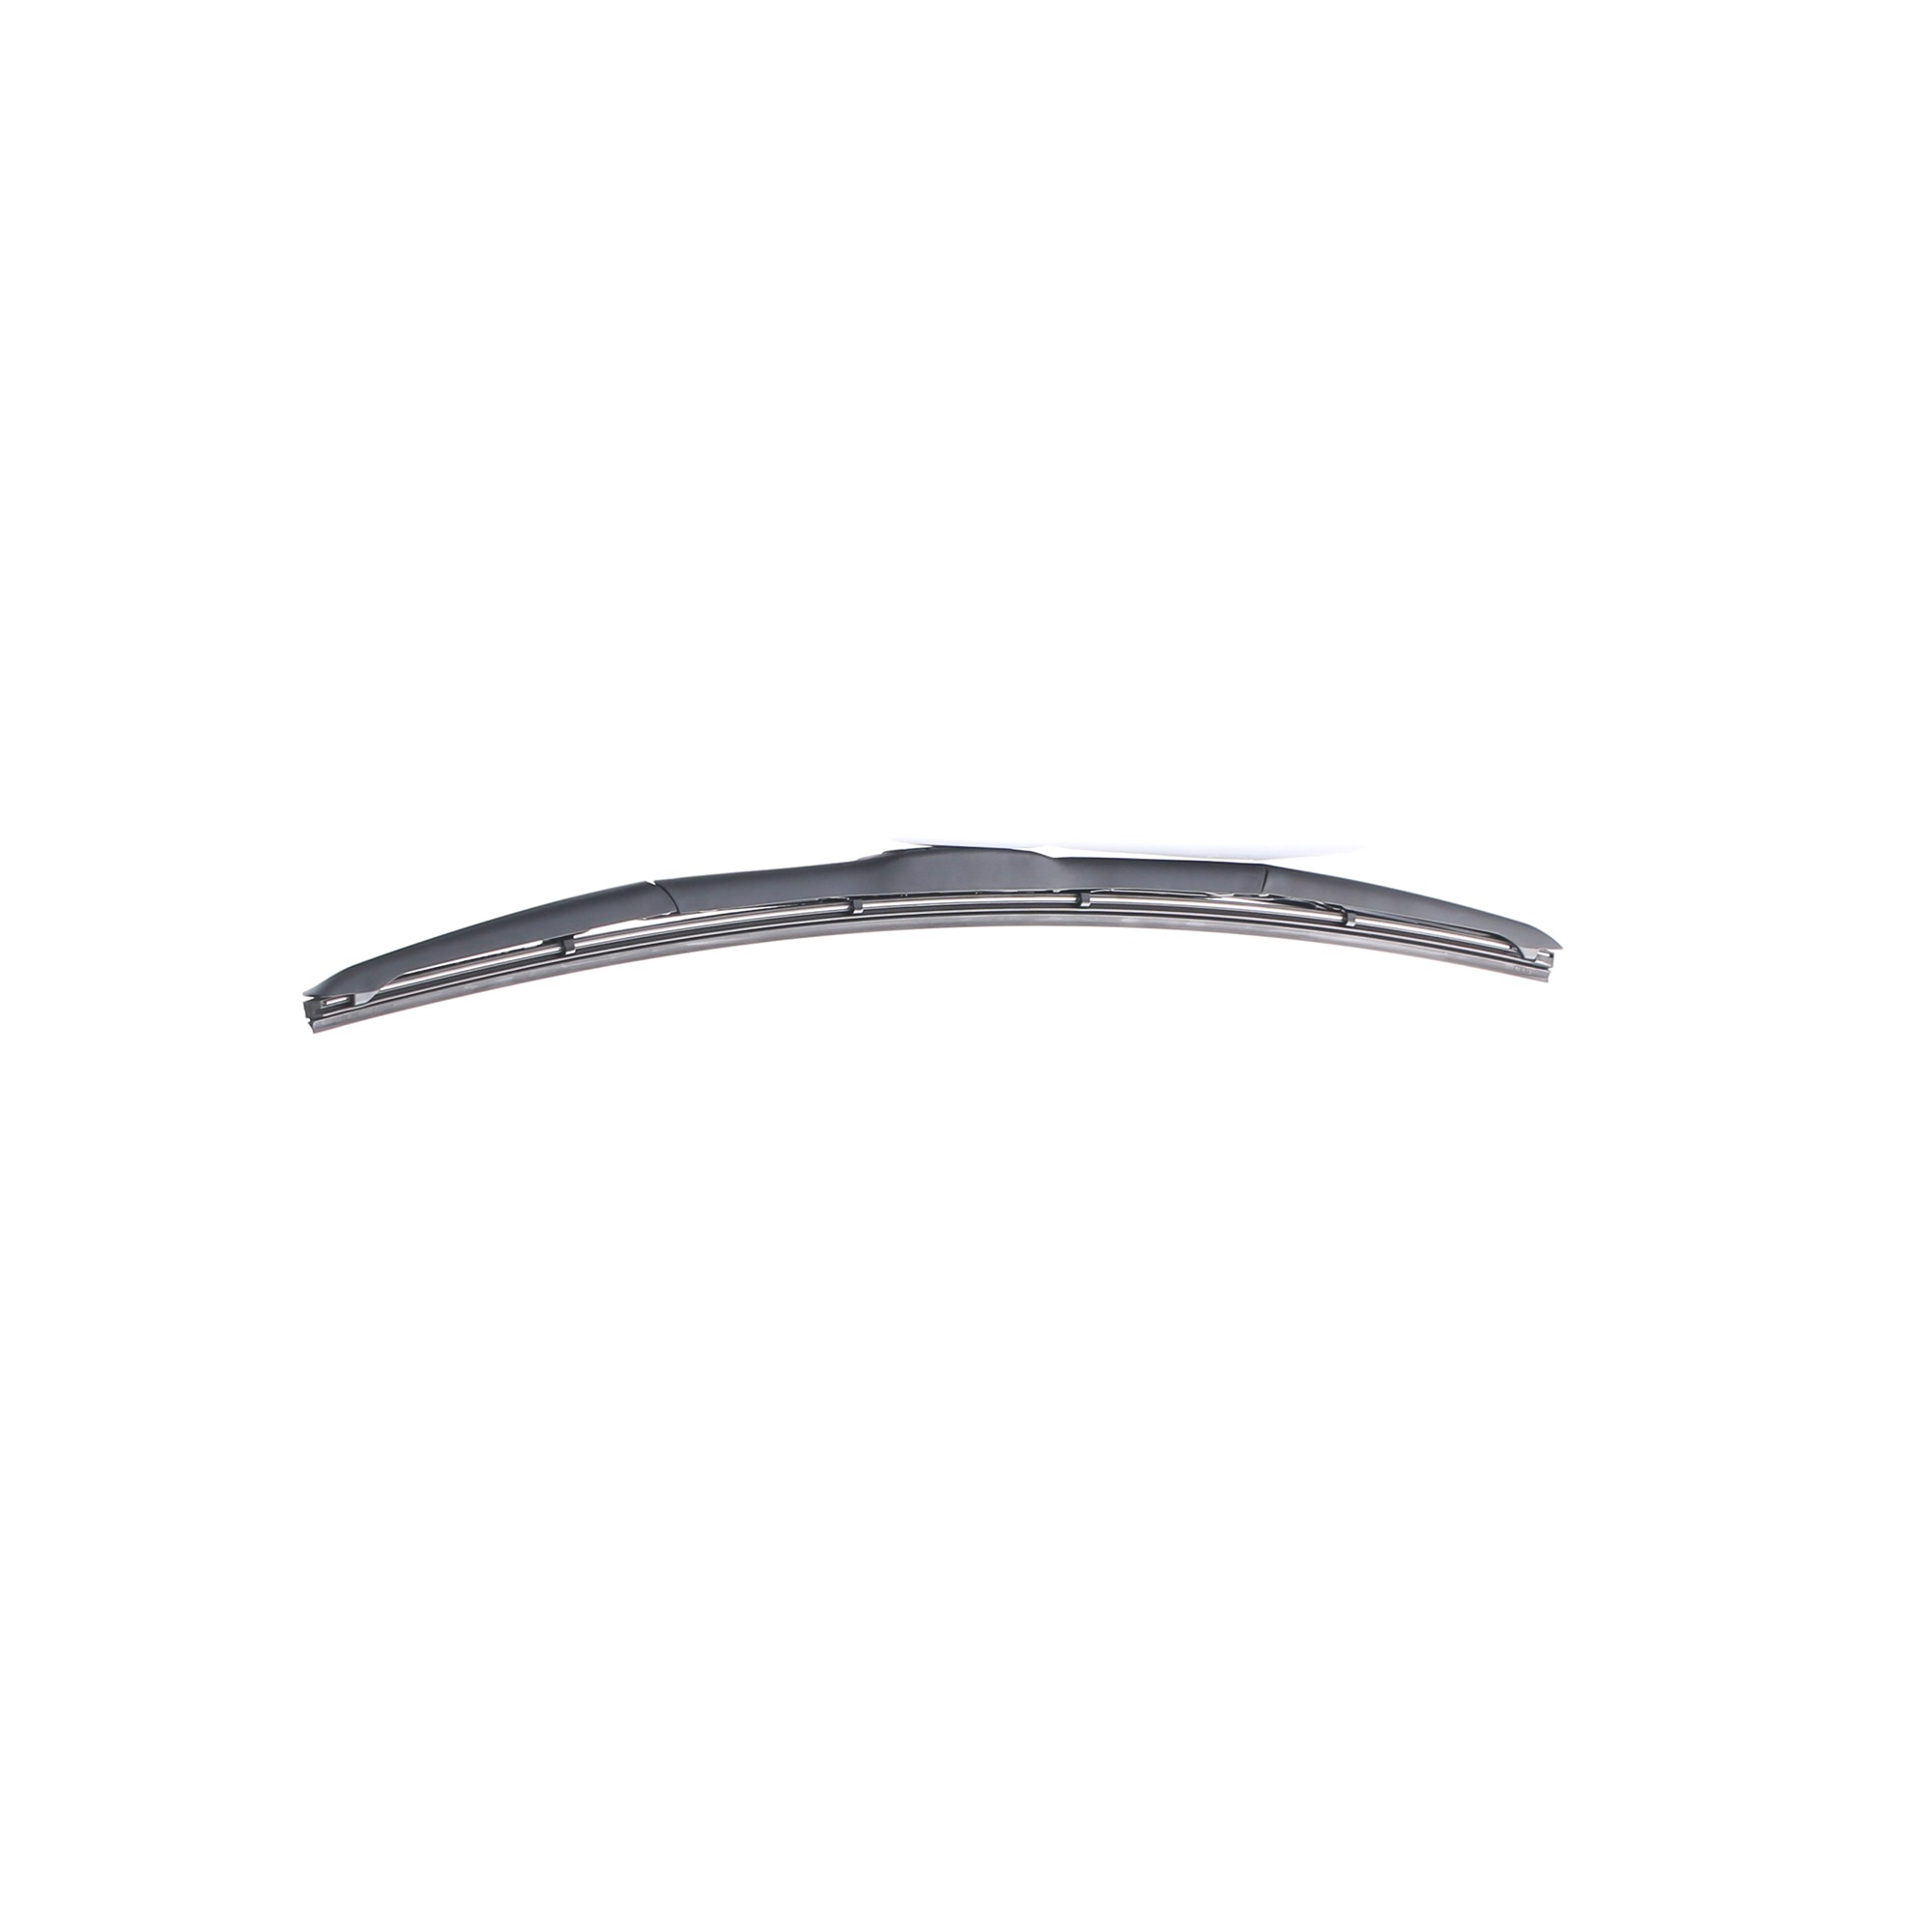 Windscreen cleaning system Wiper Blade DUR-060R